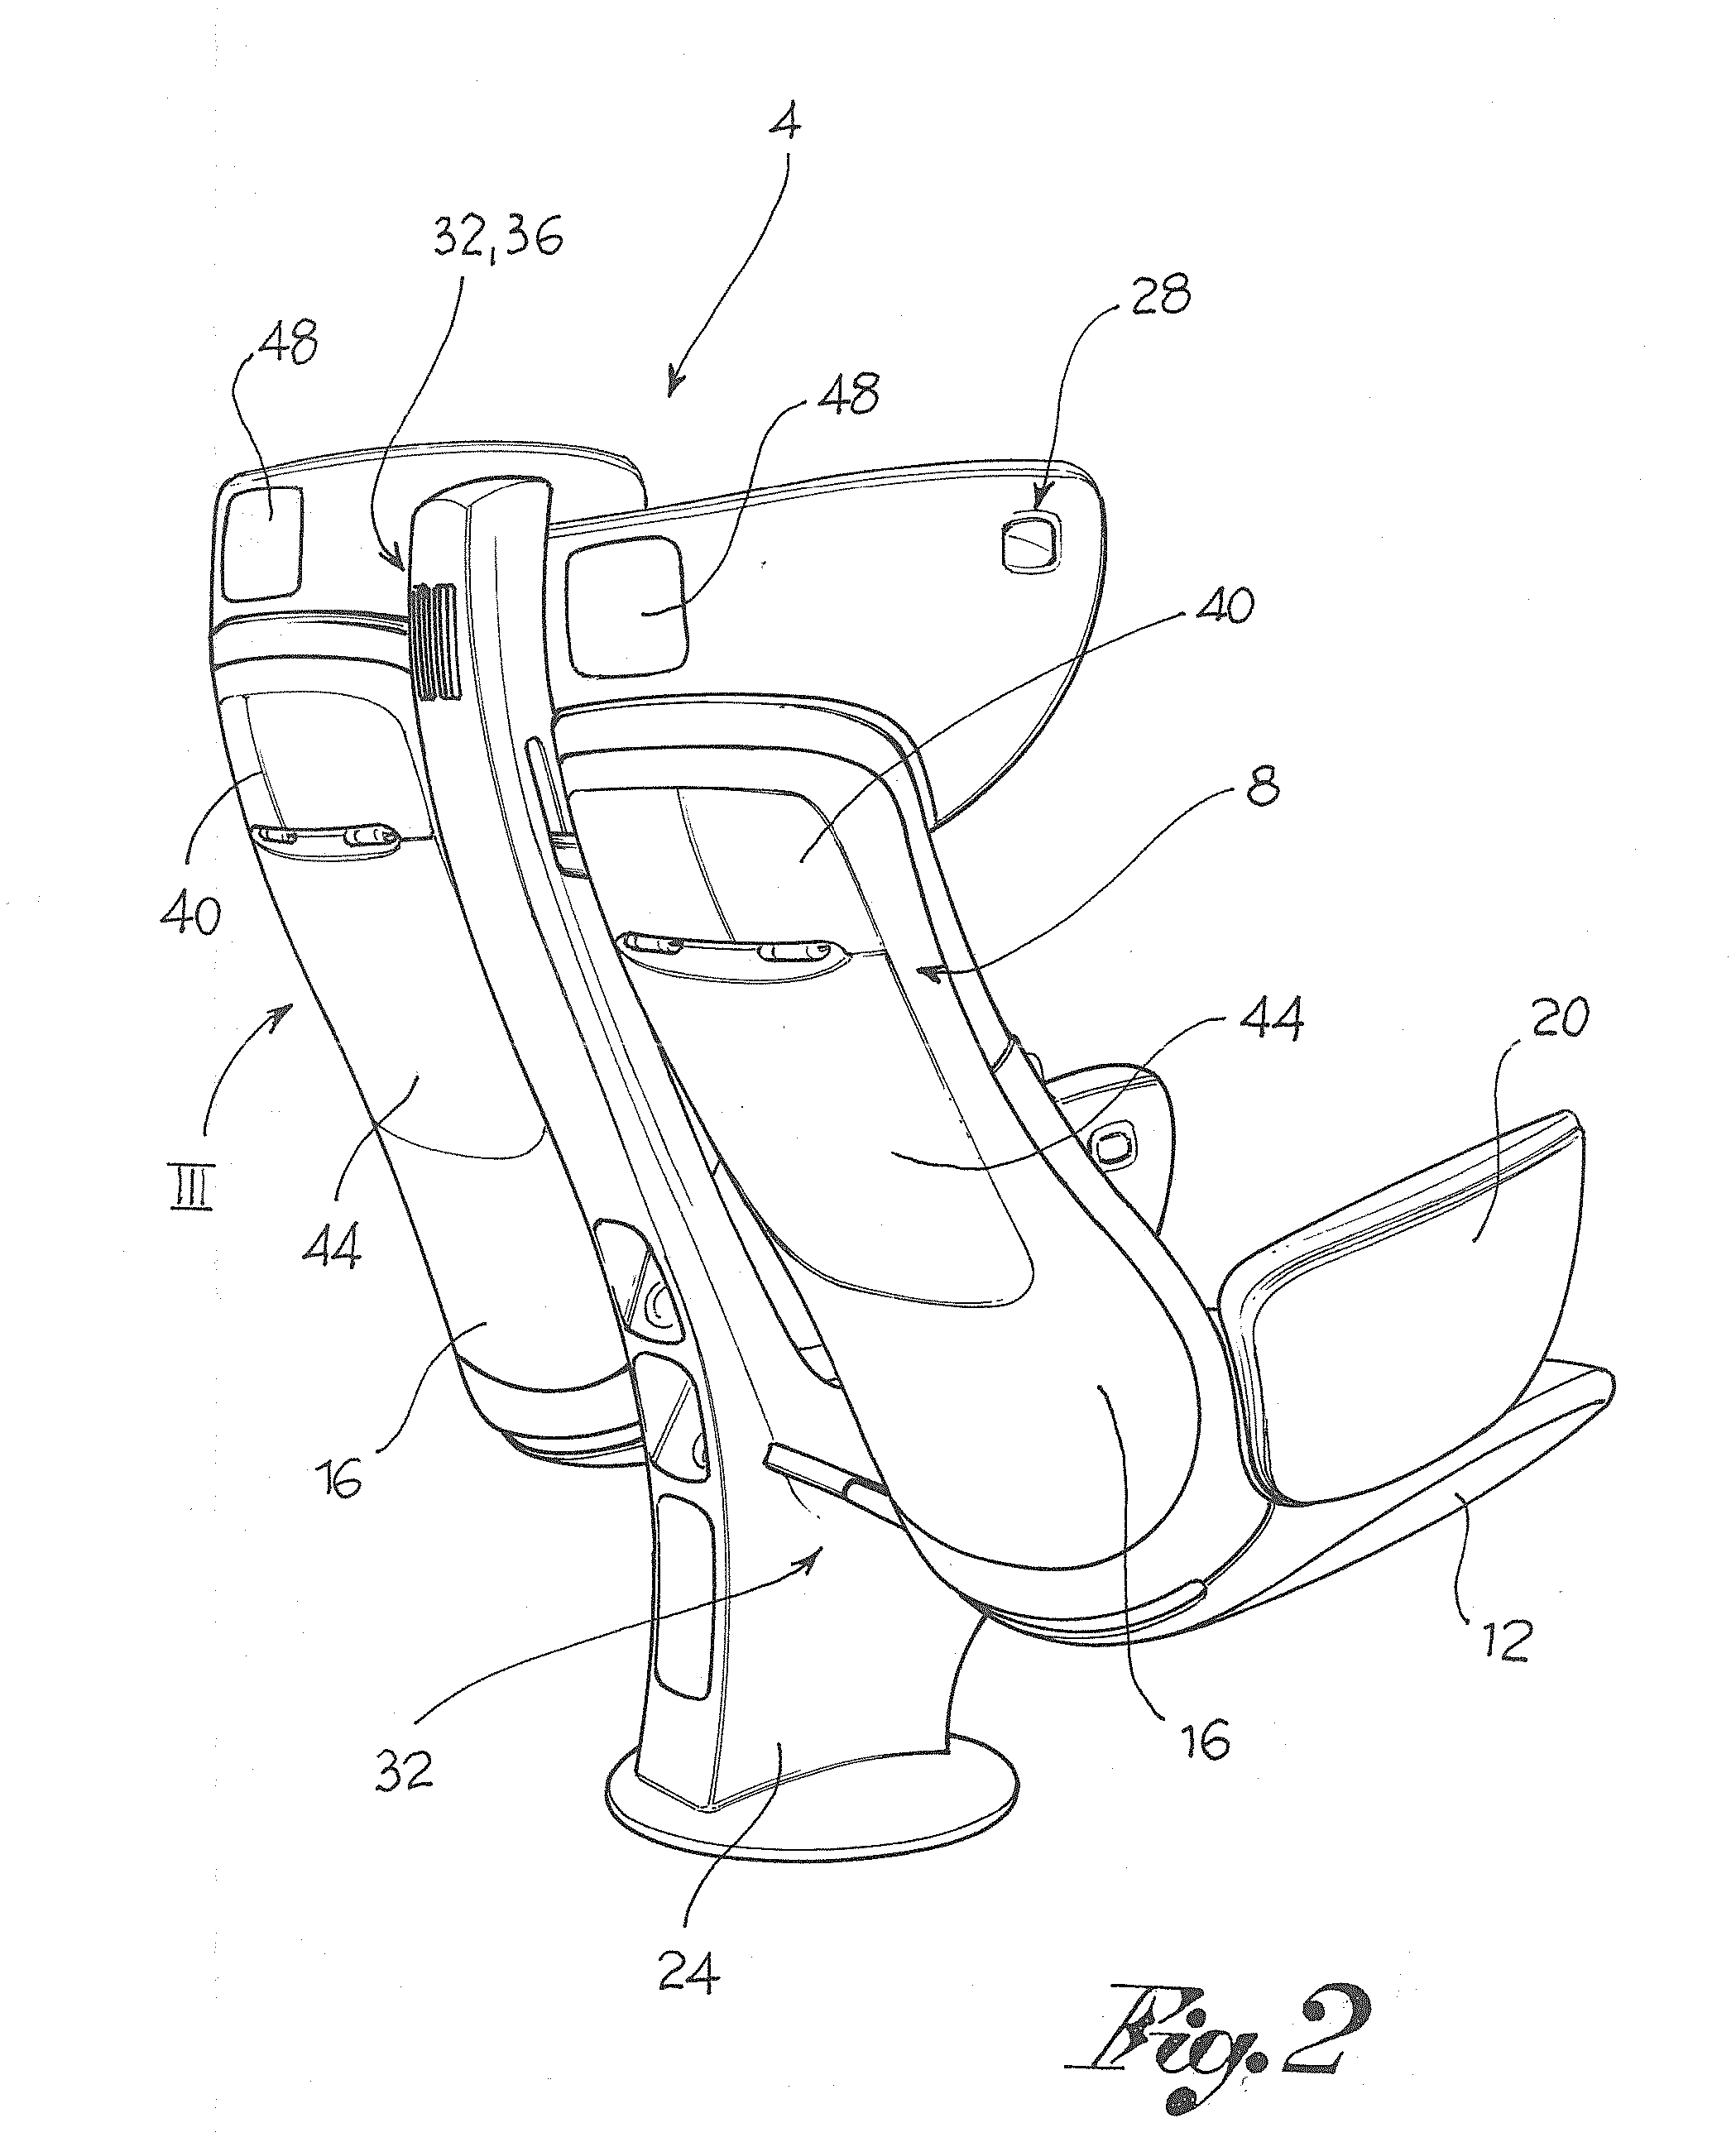 Seat, Operating and Control System of Seats, Method of Operating and Controlling Seats